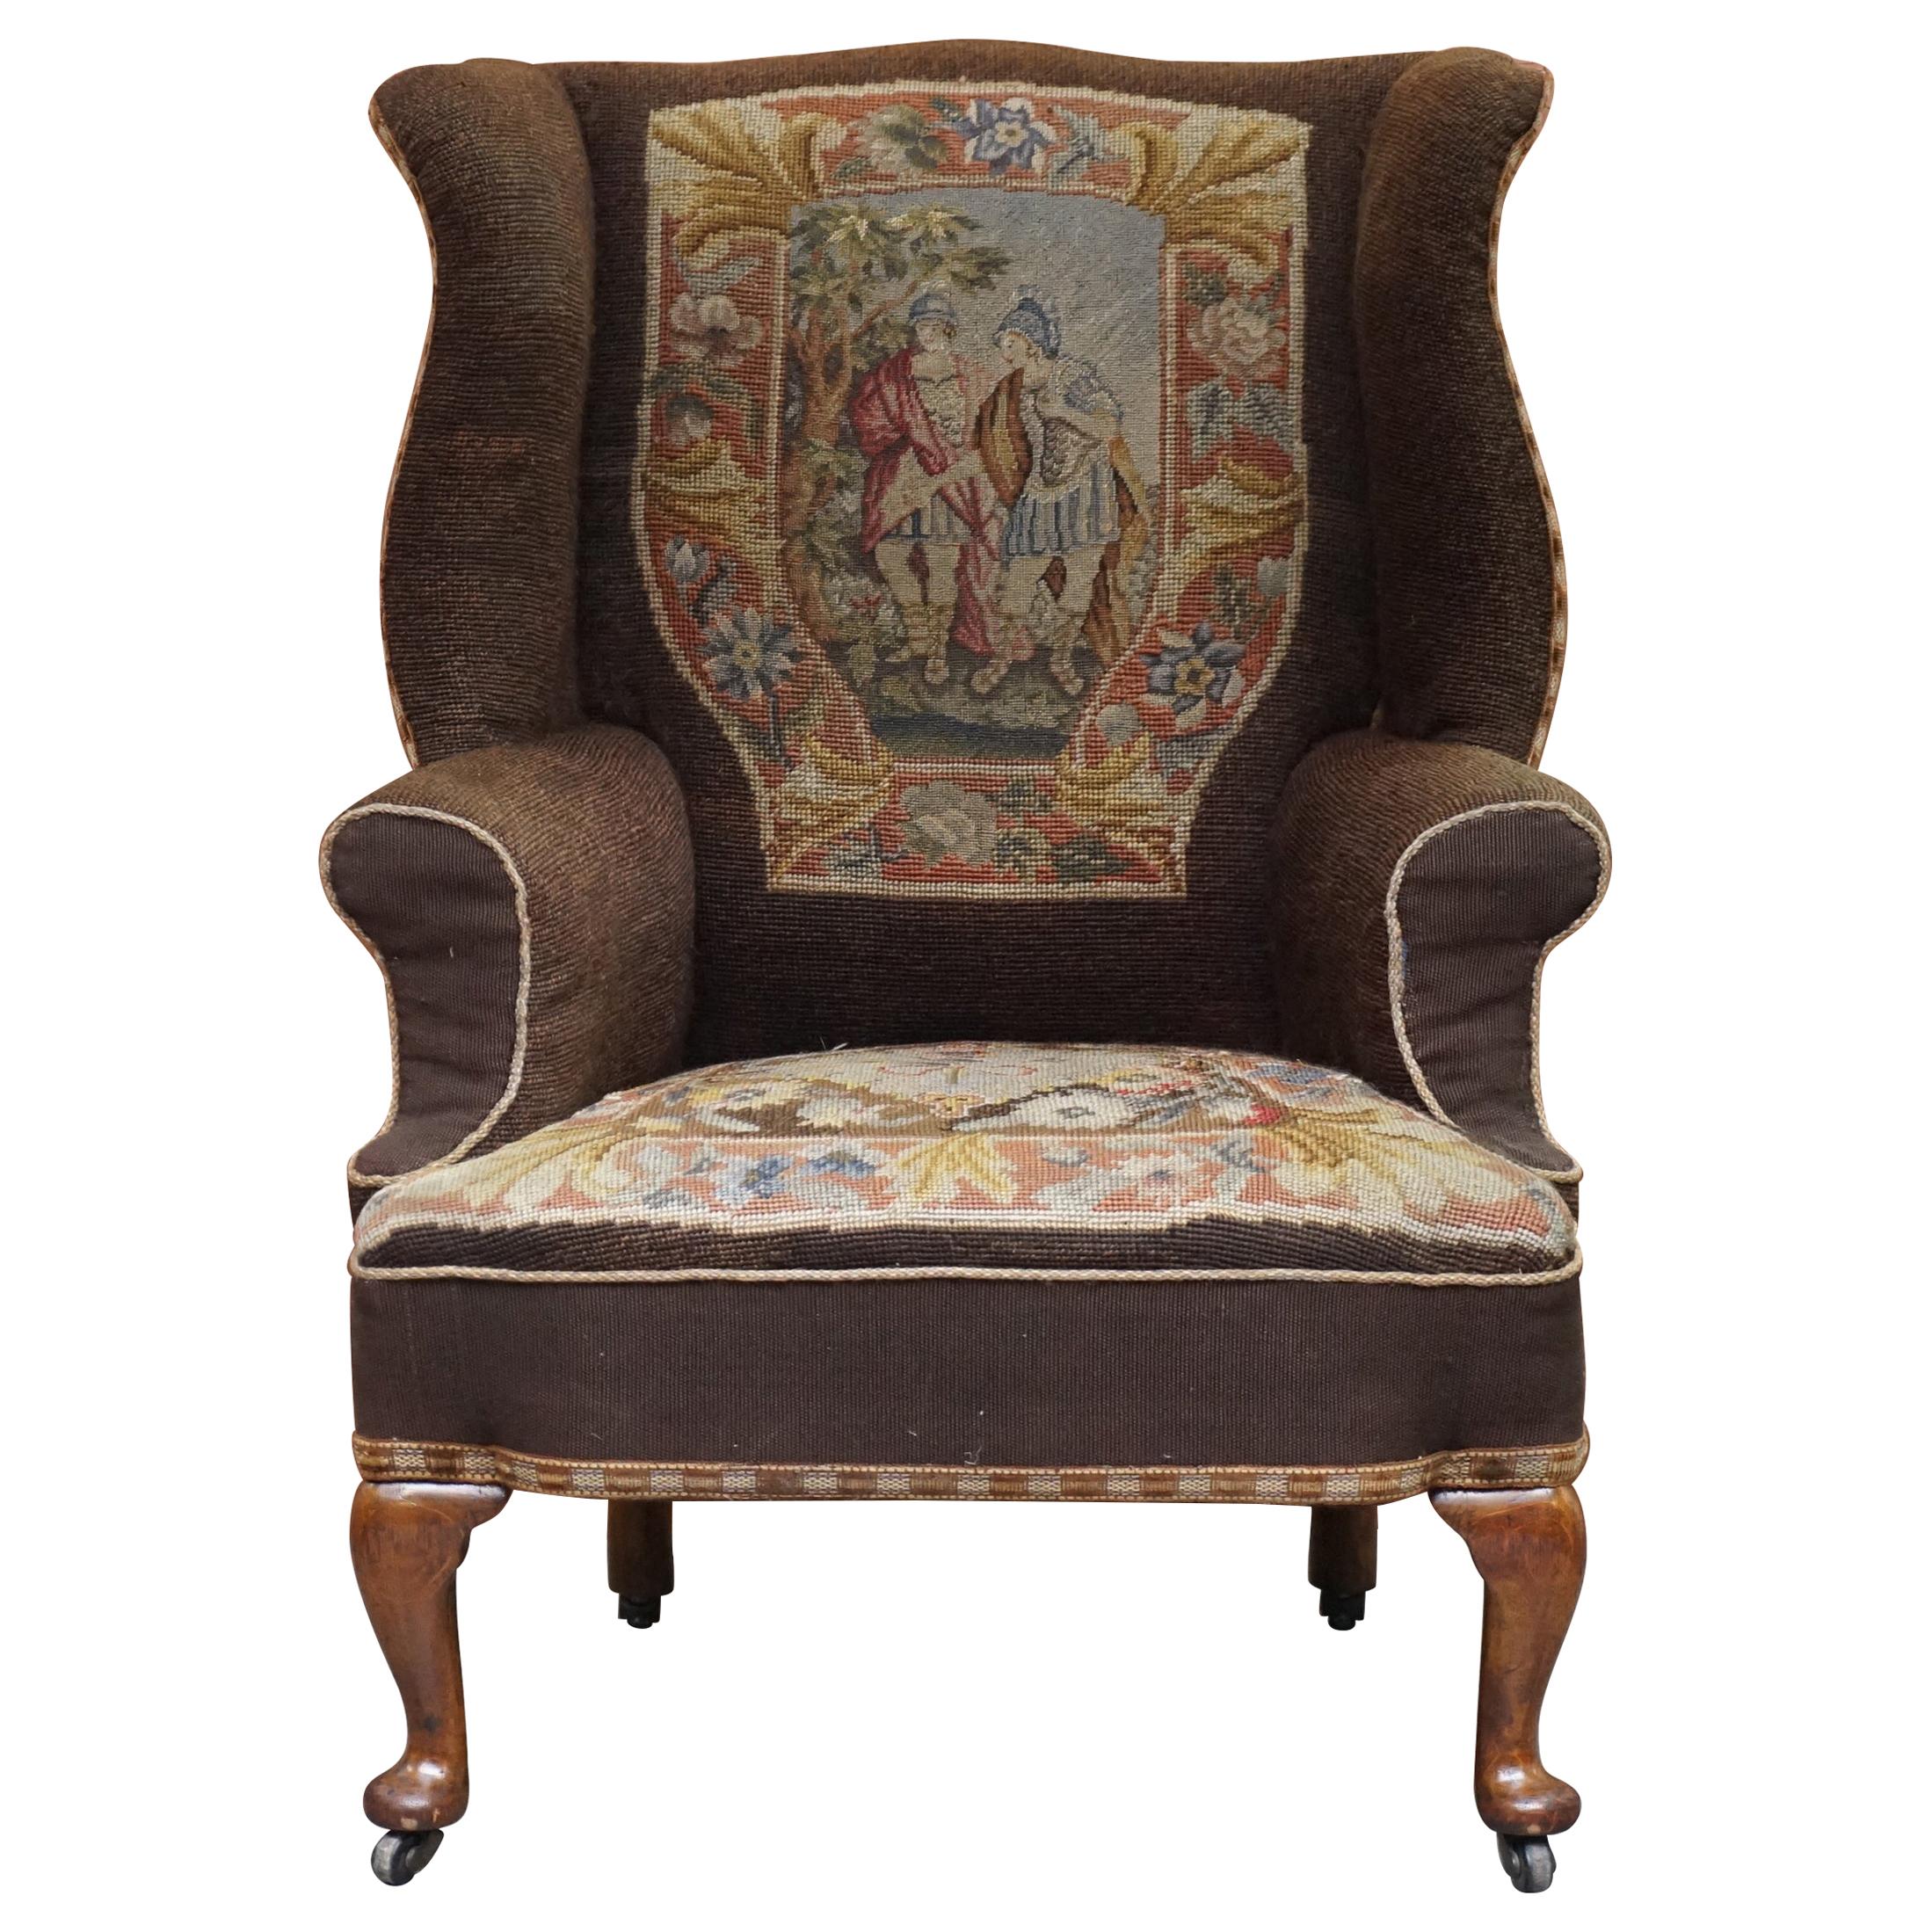 Original circa 1840 Antique Victorian Wingback Armchair Embroidered Upholstery For Sale